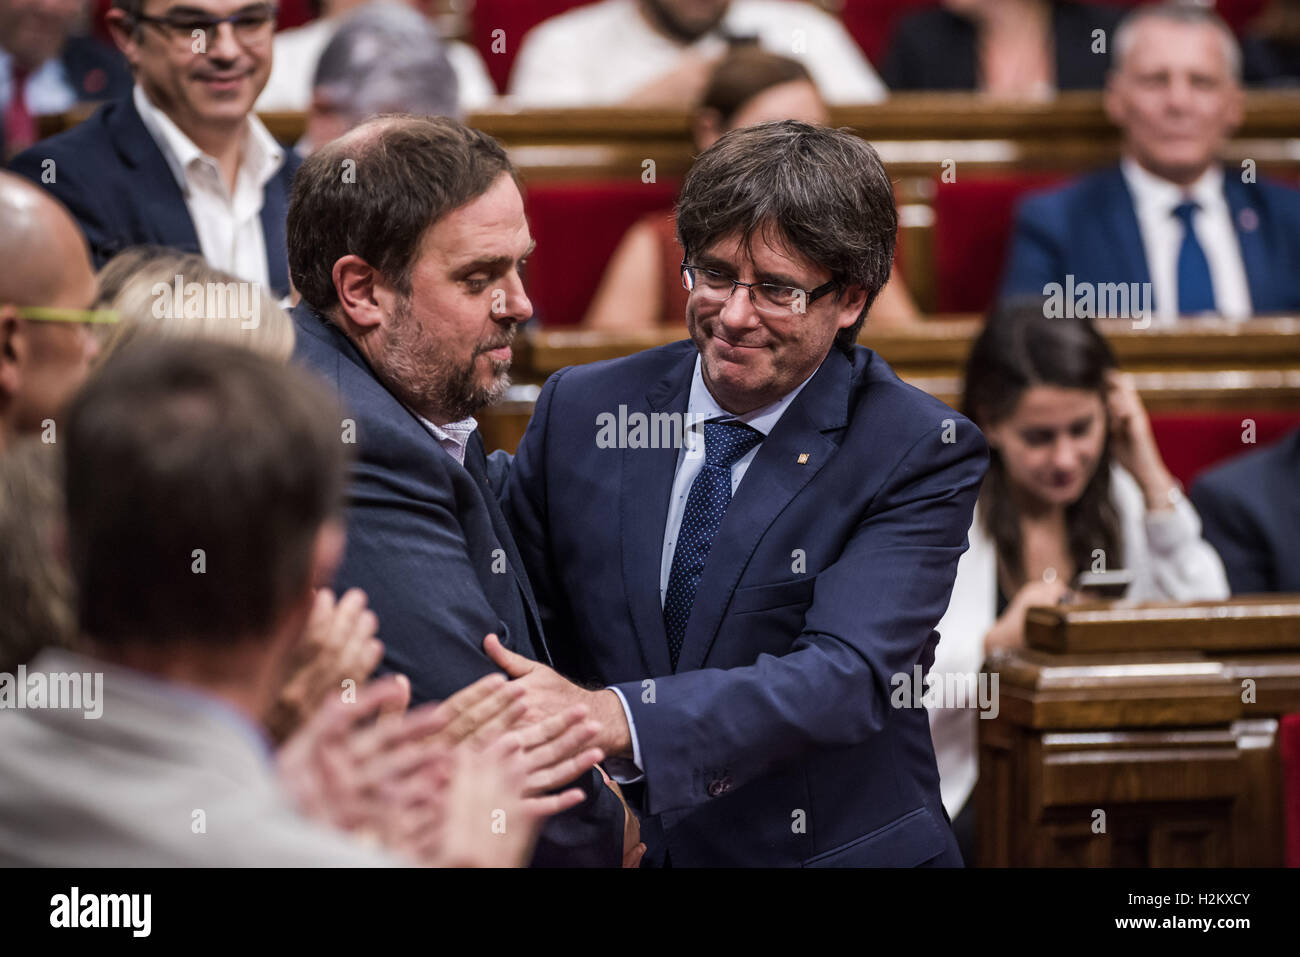 Barcelona, Catalonia, Spain. 29th Sep, 2016. CARLES PUIGDEMONT, President of the Catalan Government, is congratulates by ORIOL JUNQUERAS, Vice-Prsident of the Catalan government, after he wins the motion of confidence in the Catalan parliament Credit:  Matthias Oesterle/ZUMA Wire/Alamy Live News Stock Photo